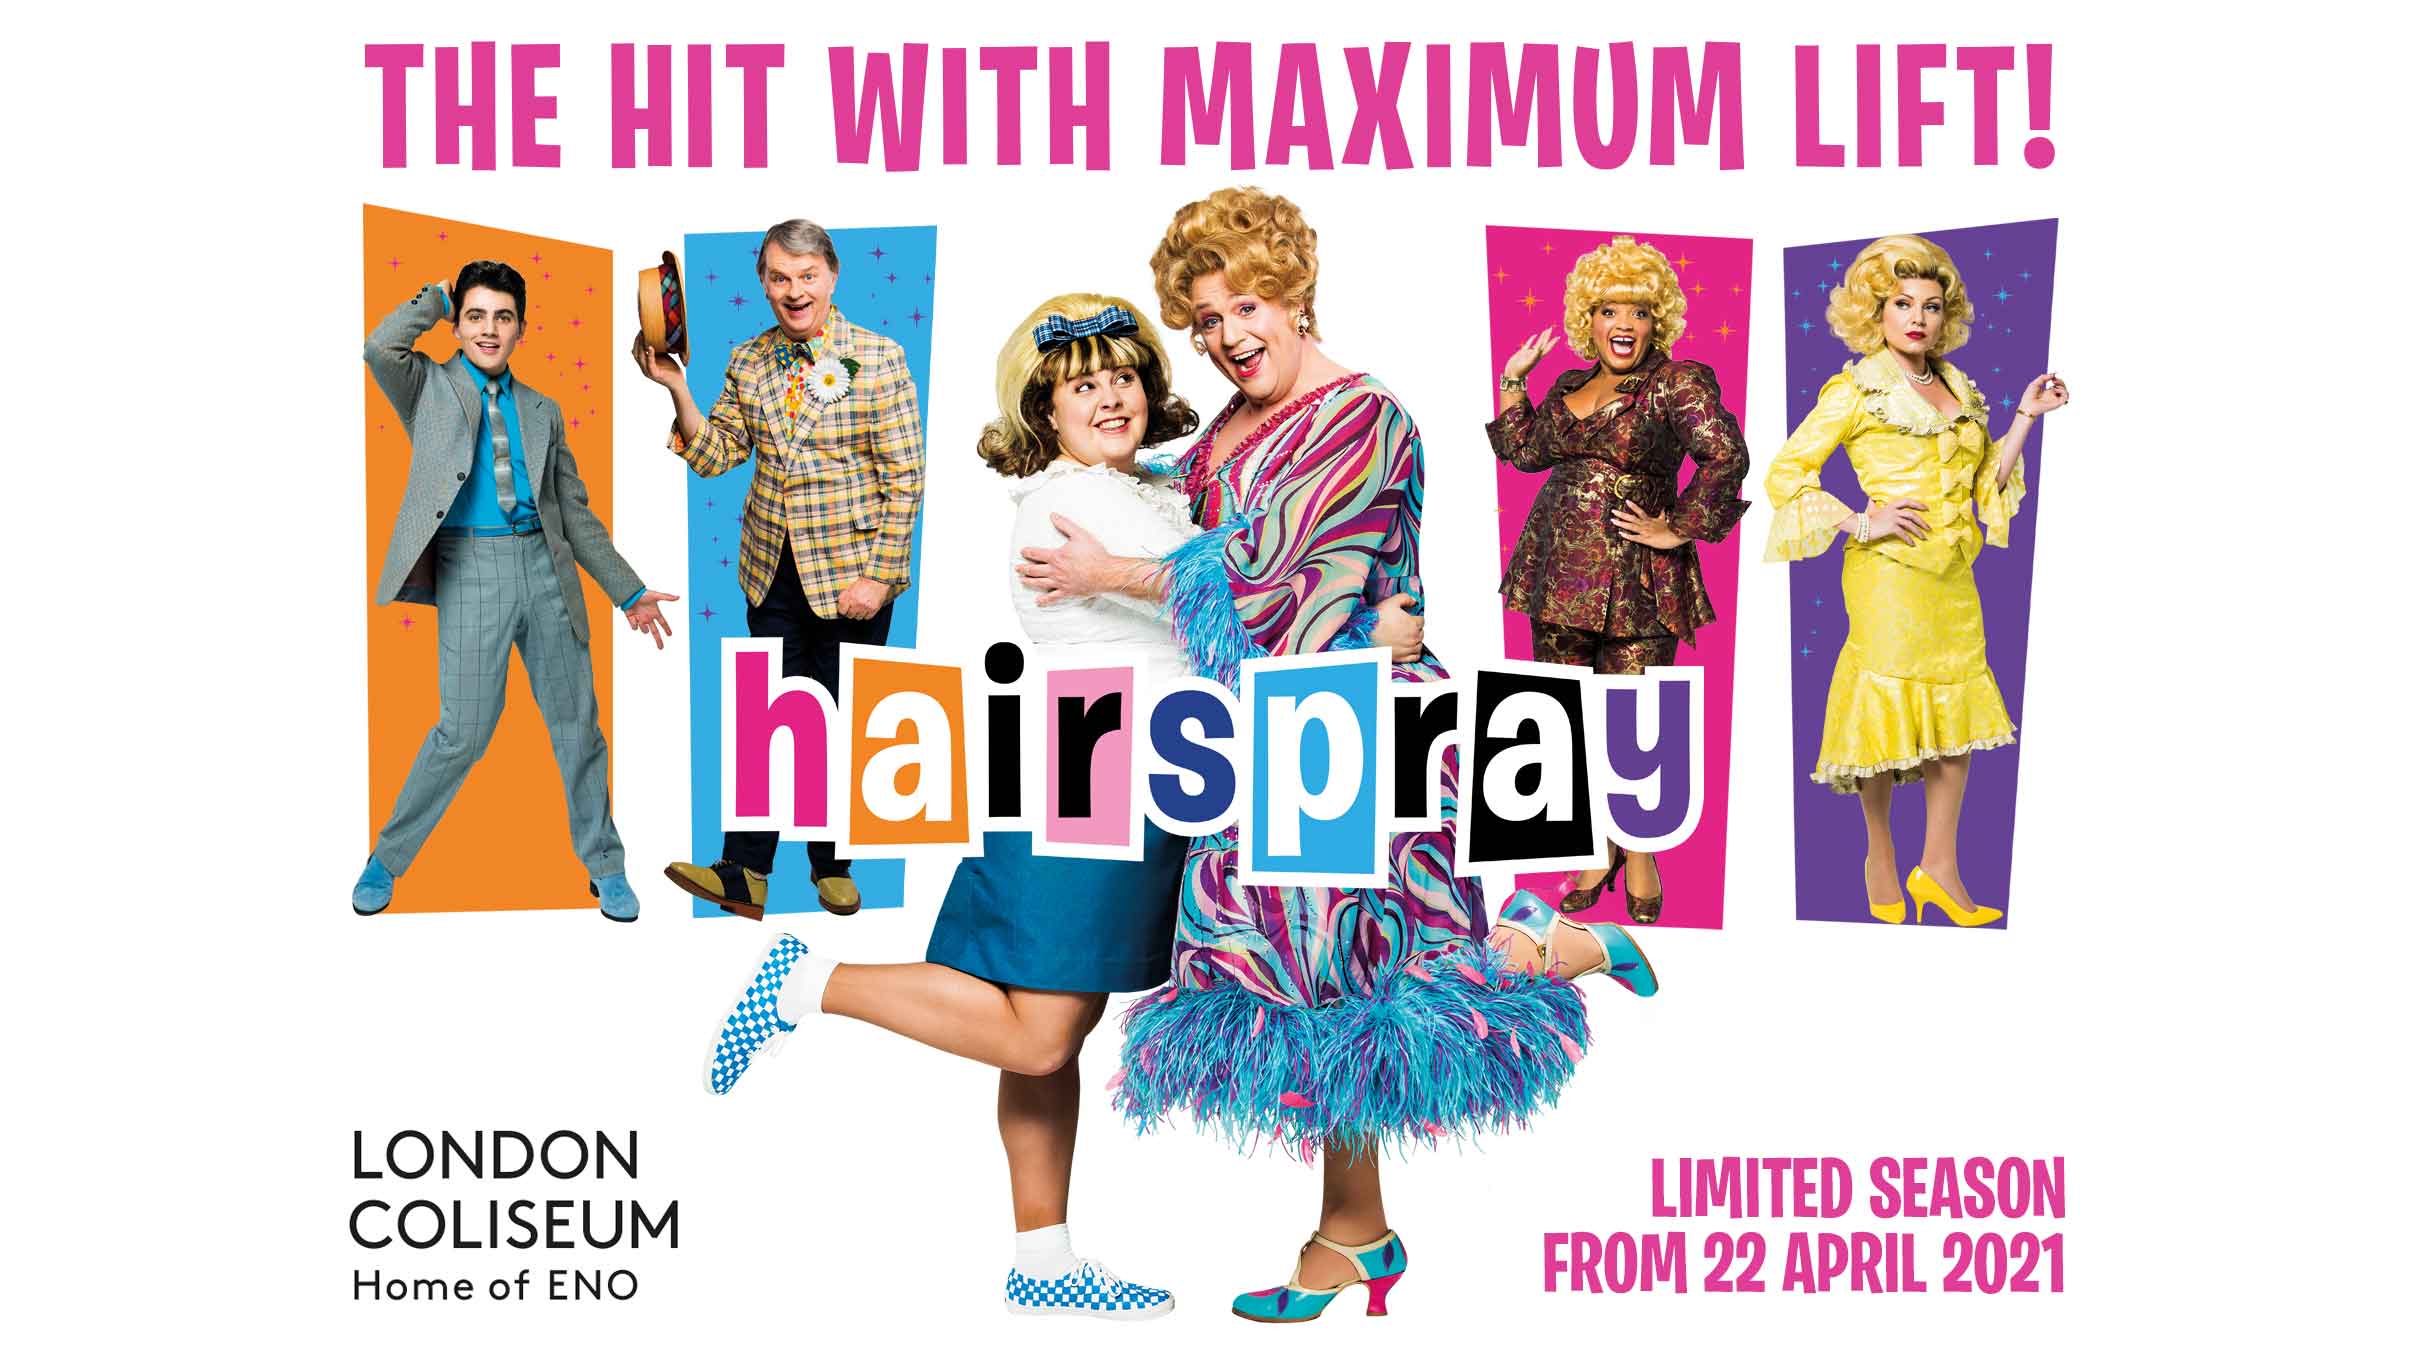 NEWS: London production of Hairspray moved to April 2021